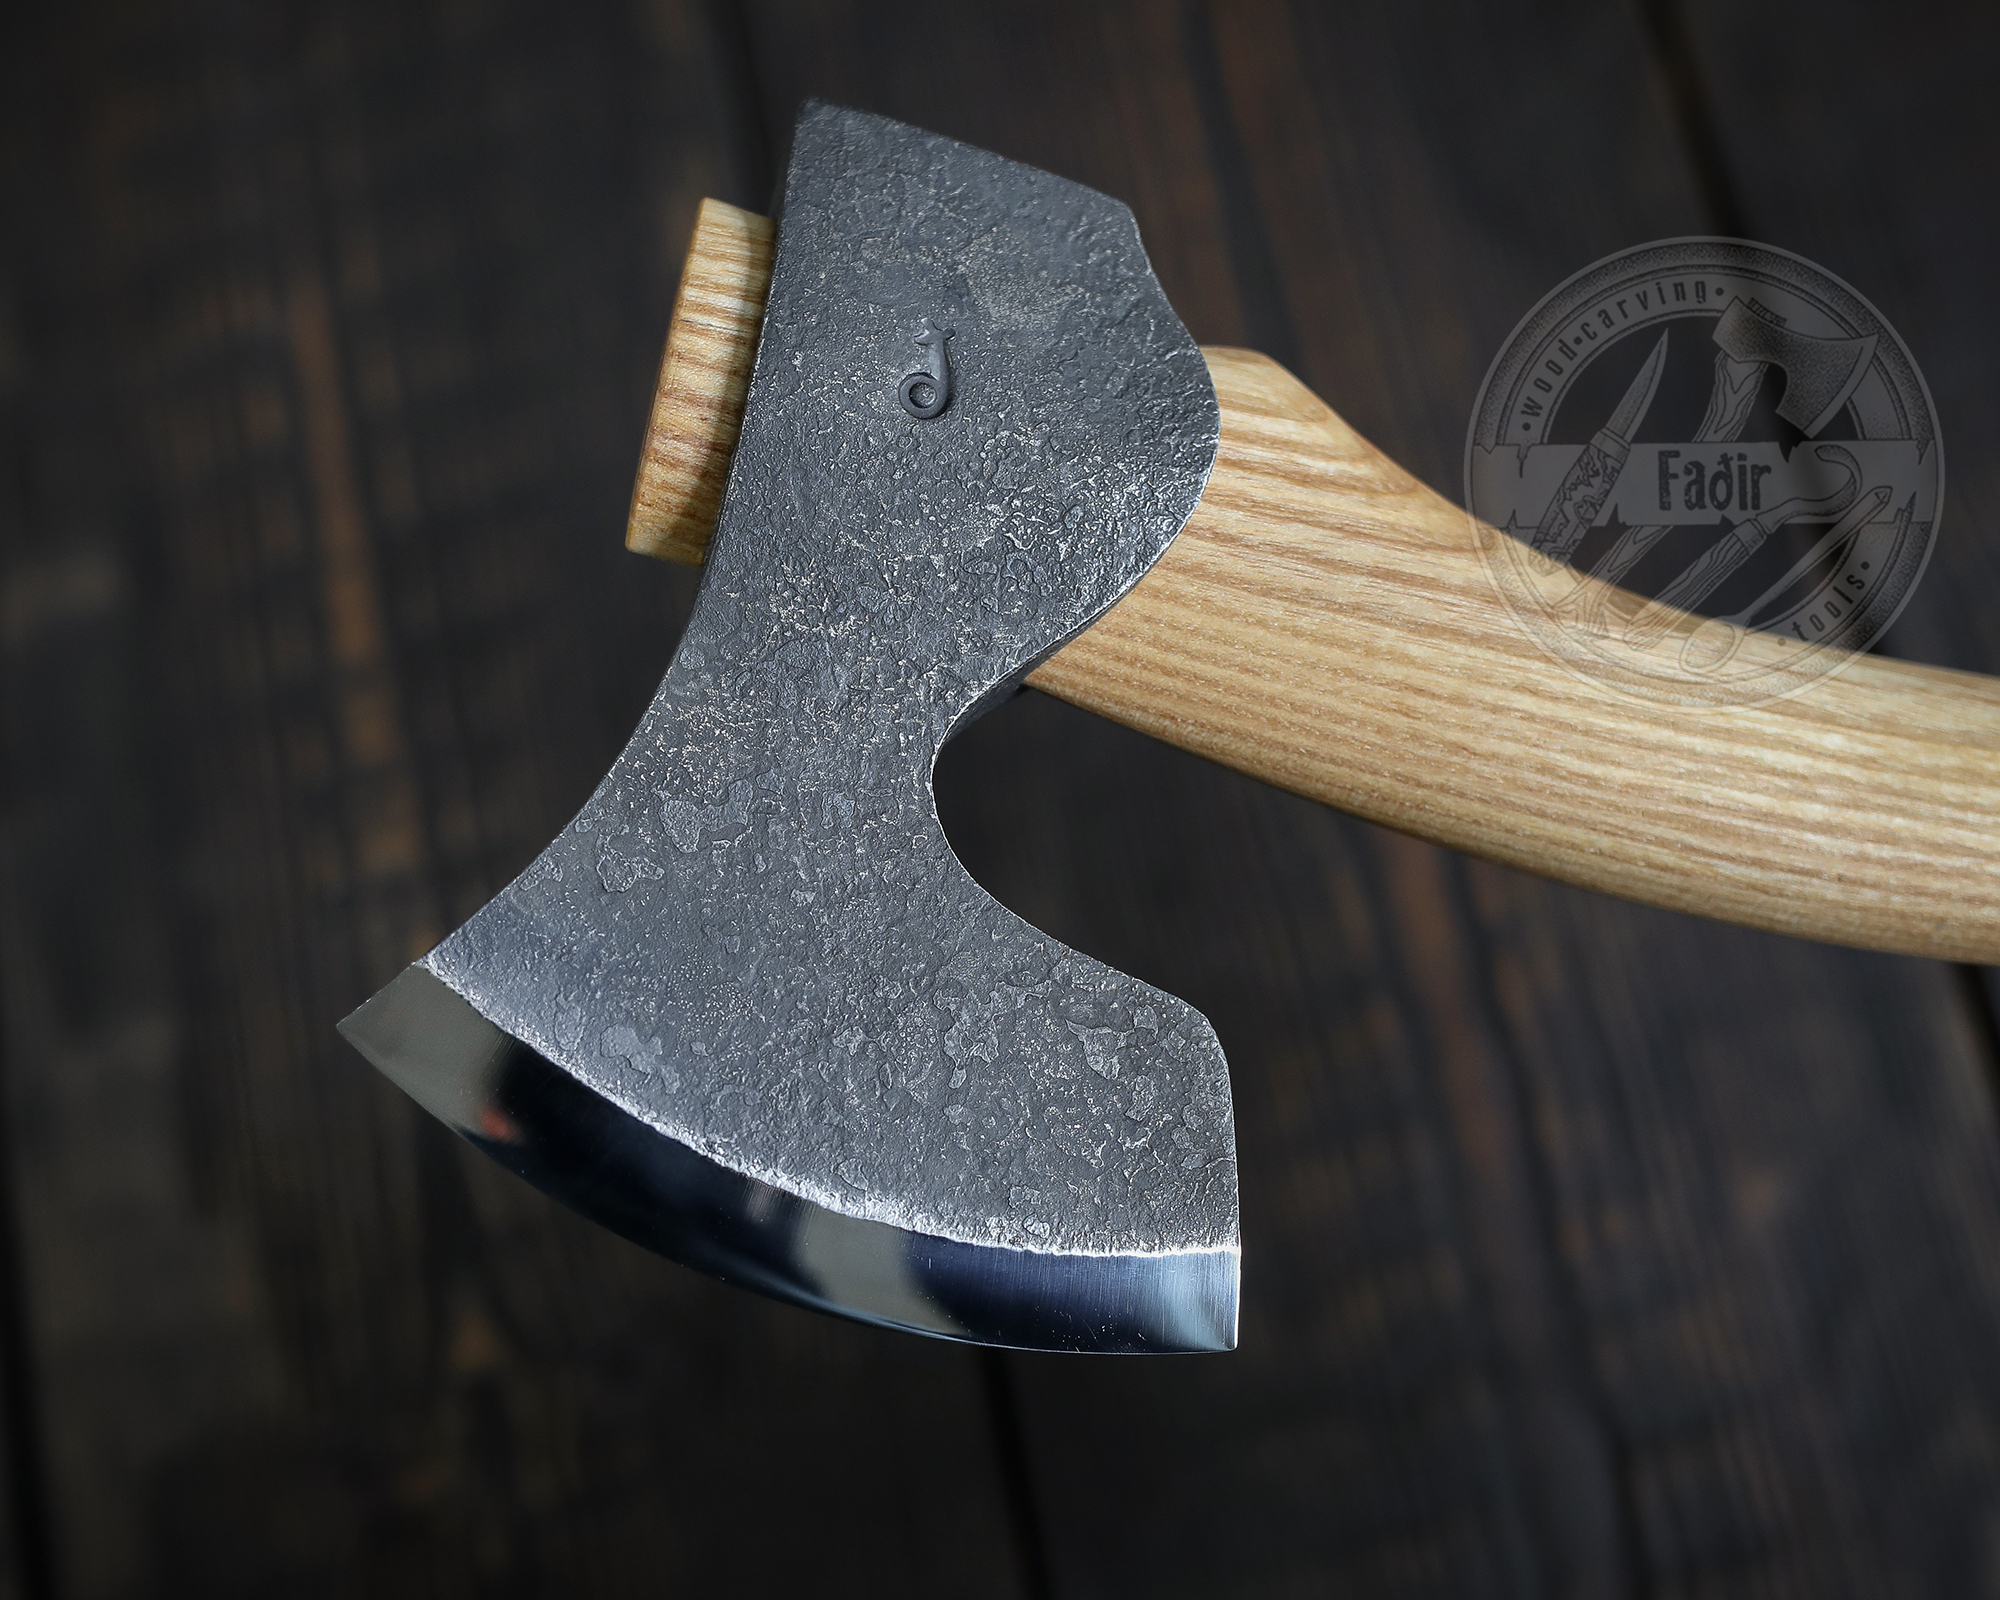 Carving Axe, Axe for Green Woodworking, Wood carving Axe - The Spoon Crank